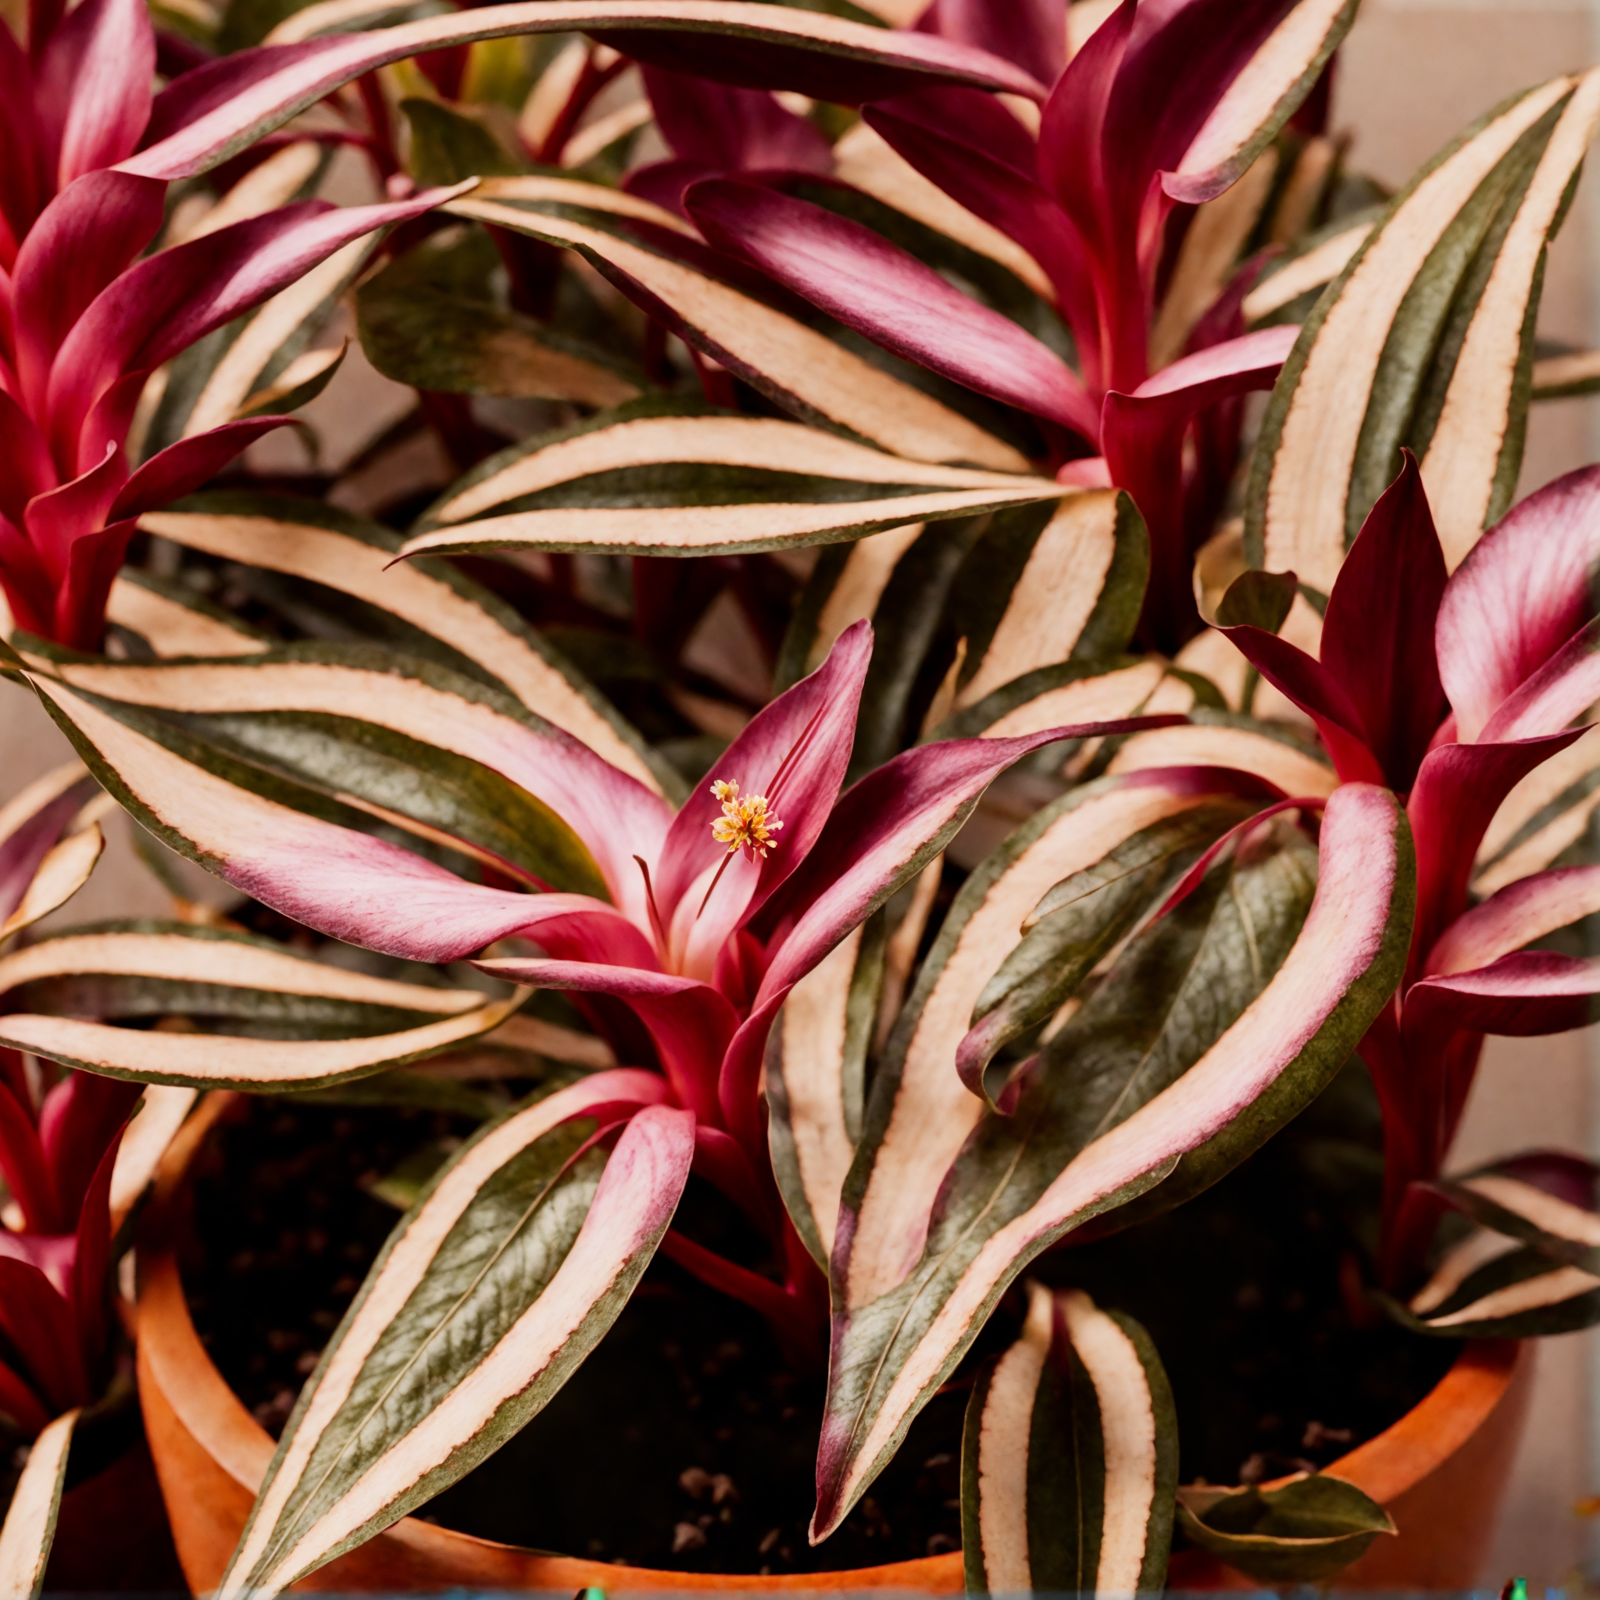 Pink Tradescantia zebrina flowers in a bowl, with striped leaves in soft indoor light.